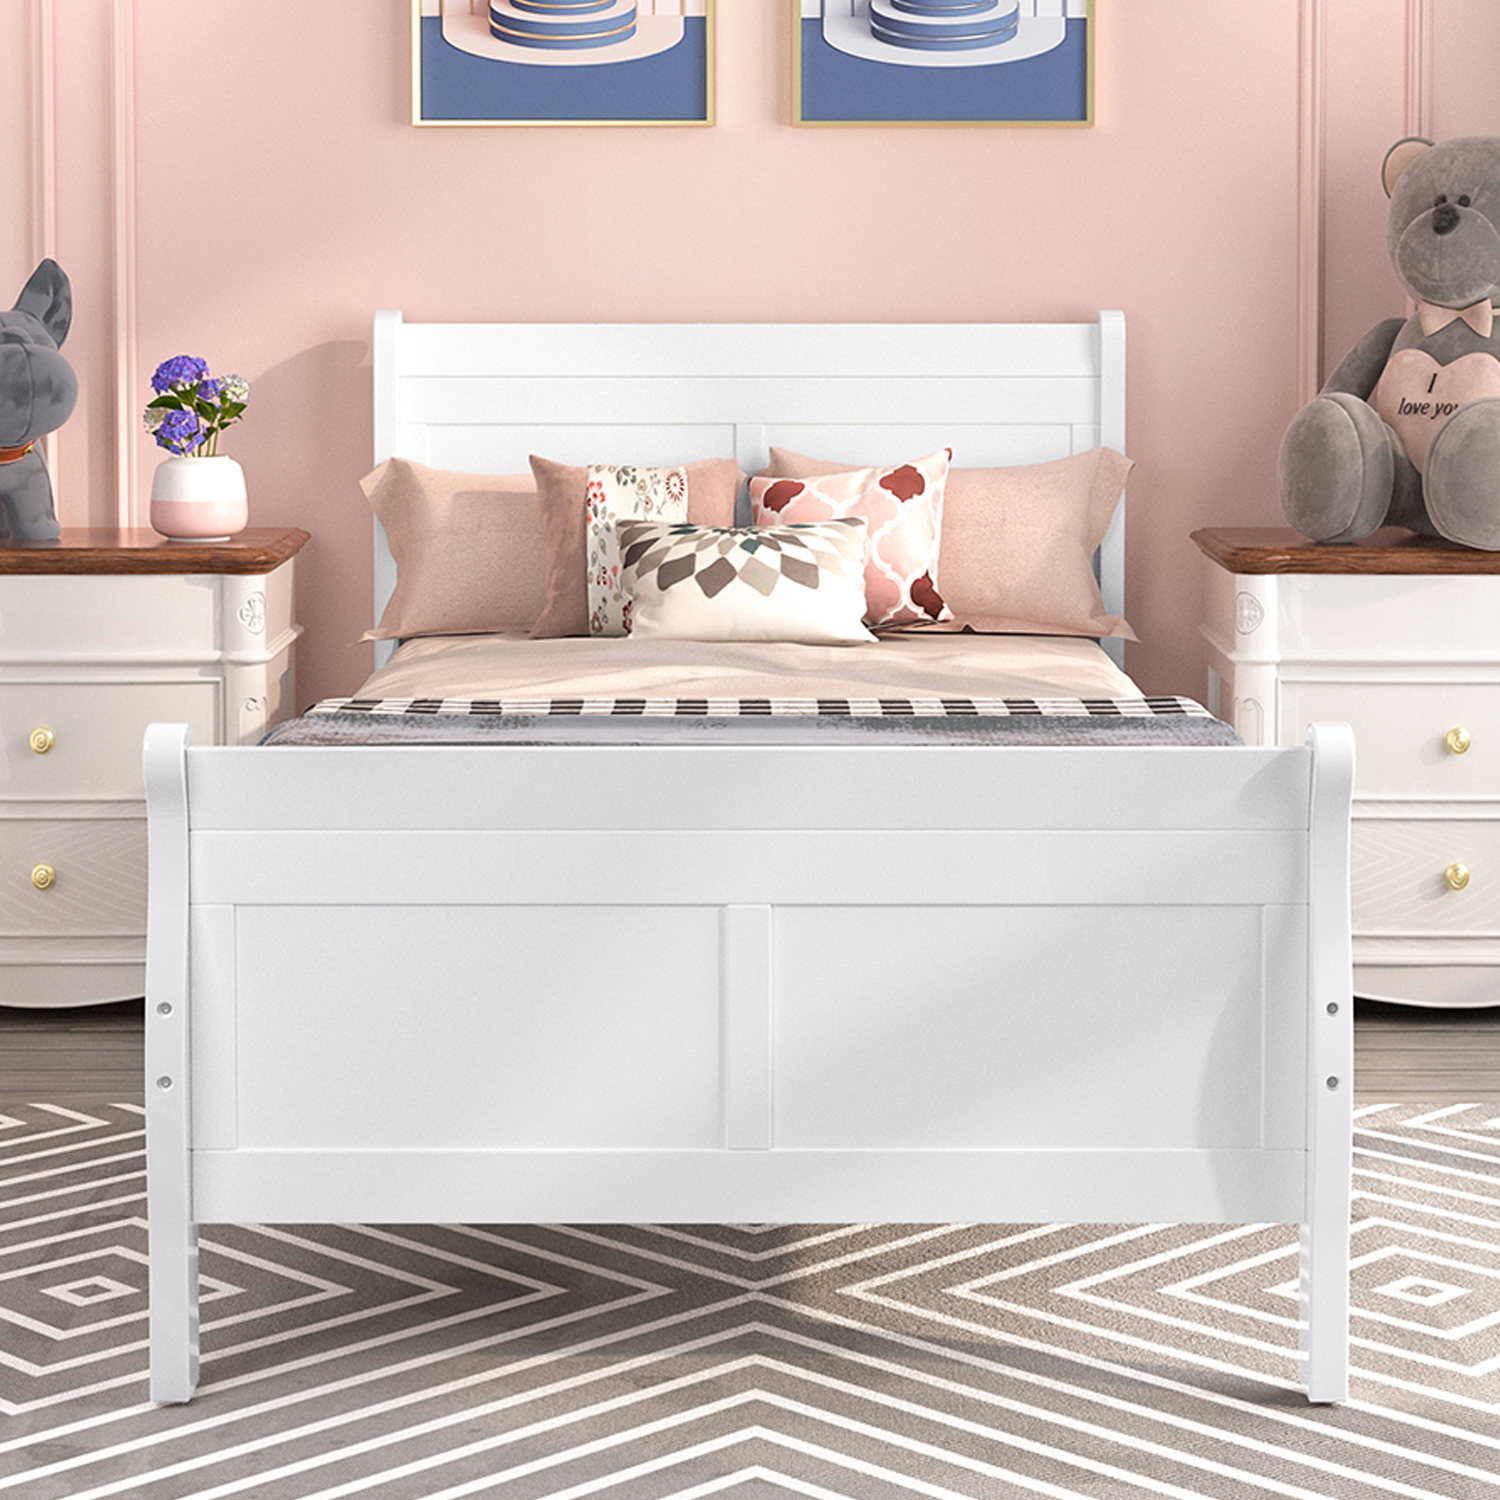 Twin Bed Frame No Box Spring Needed, Wood Platform Bed Frame with Headboard and Footboard, Strong Wooden Slats, Twin Bed Frames for Kids, Adults, Modern Bedroom Furniture, White, W9772 - image 1 of 8